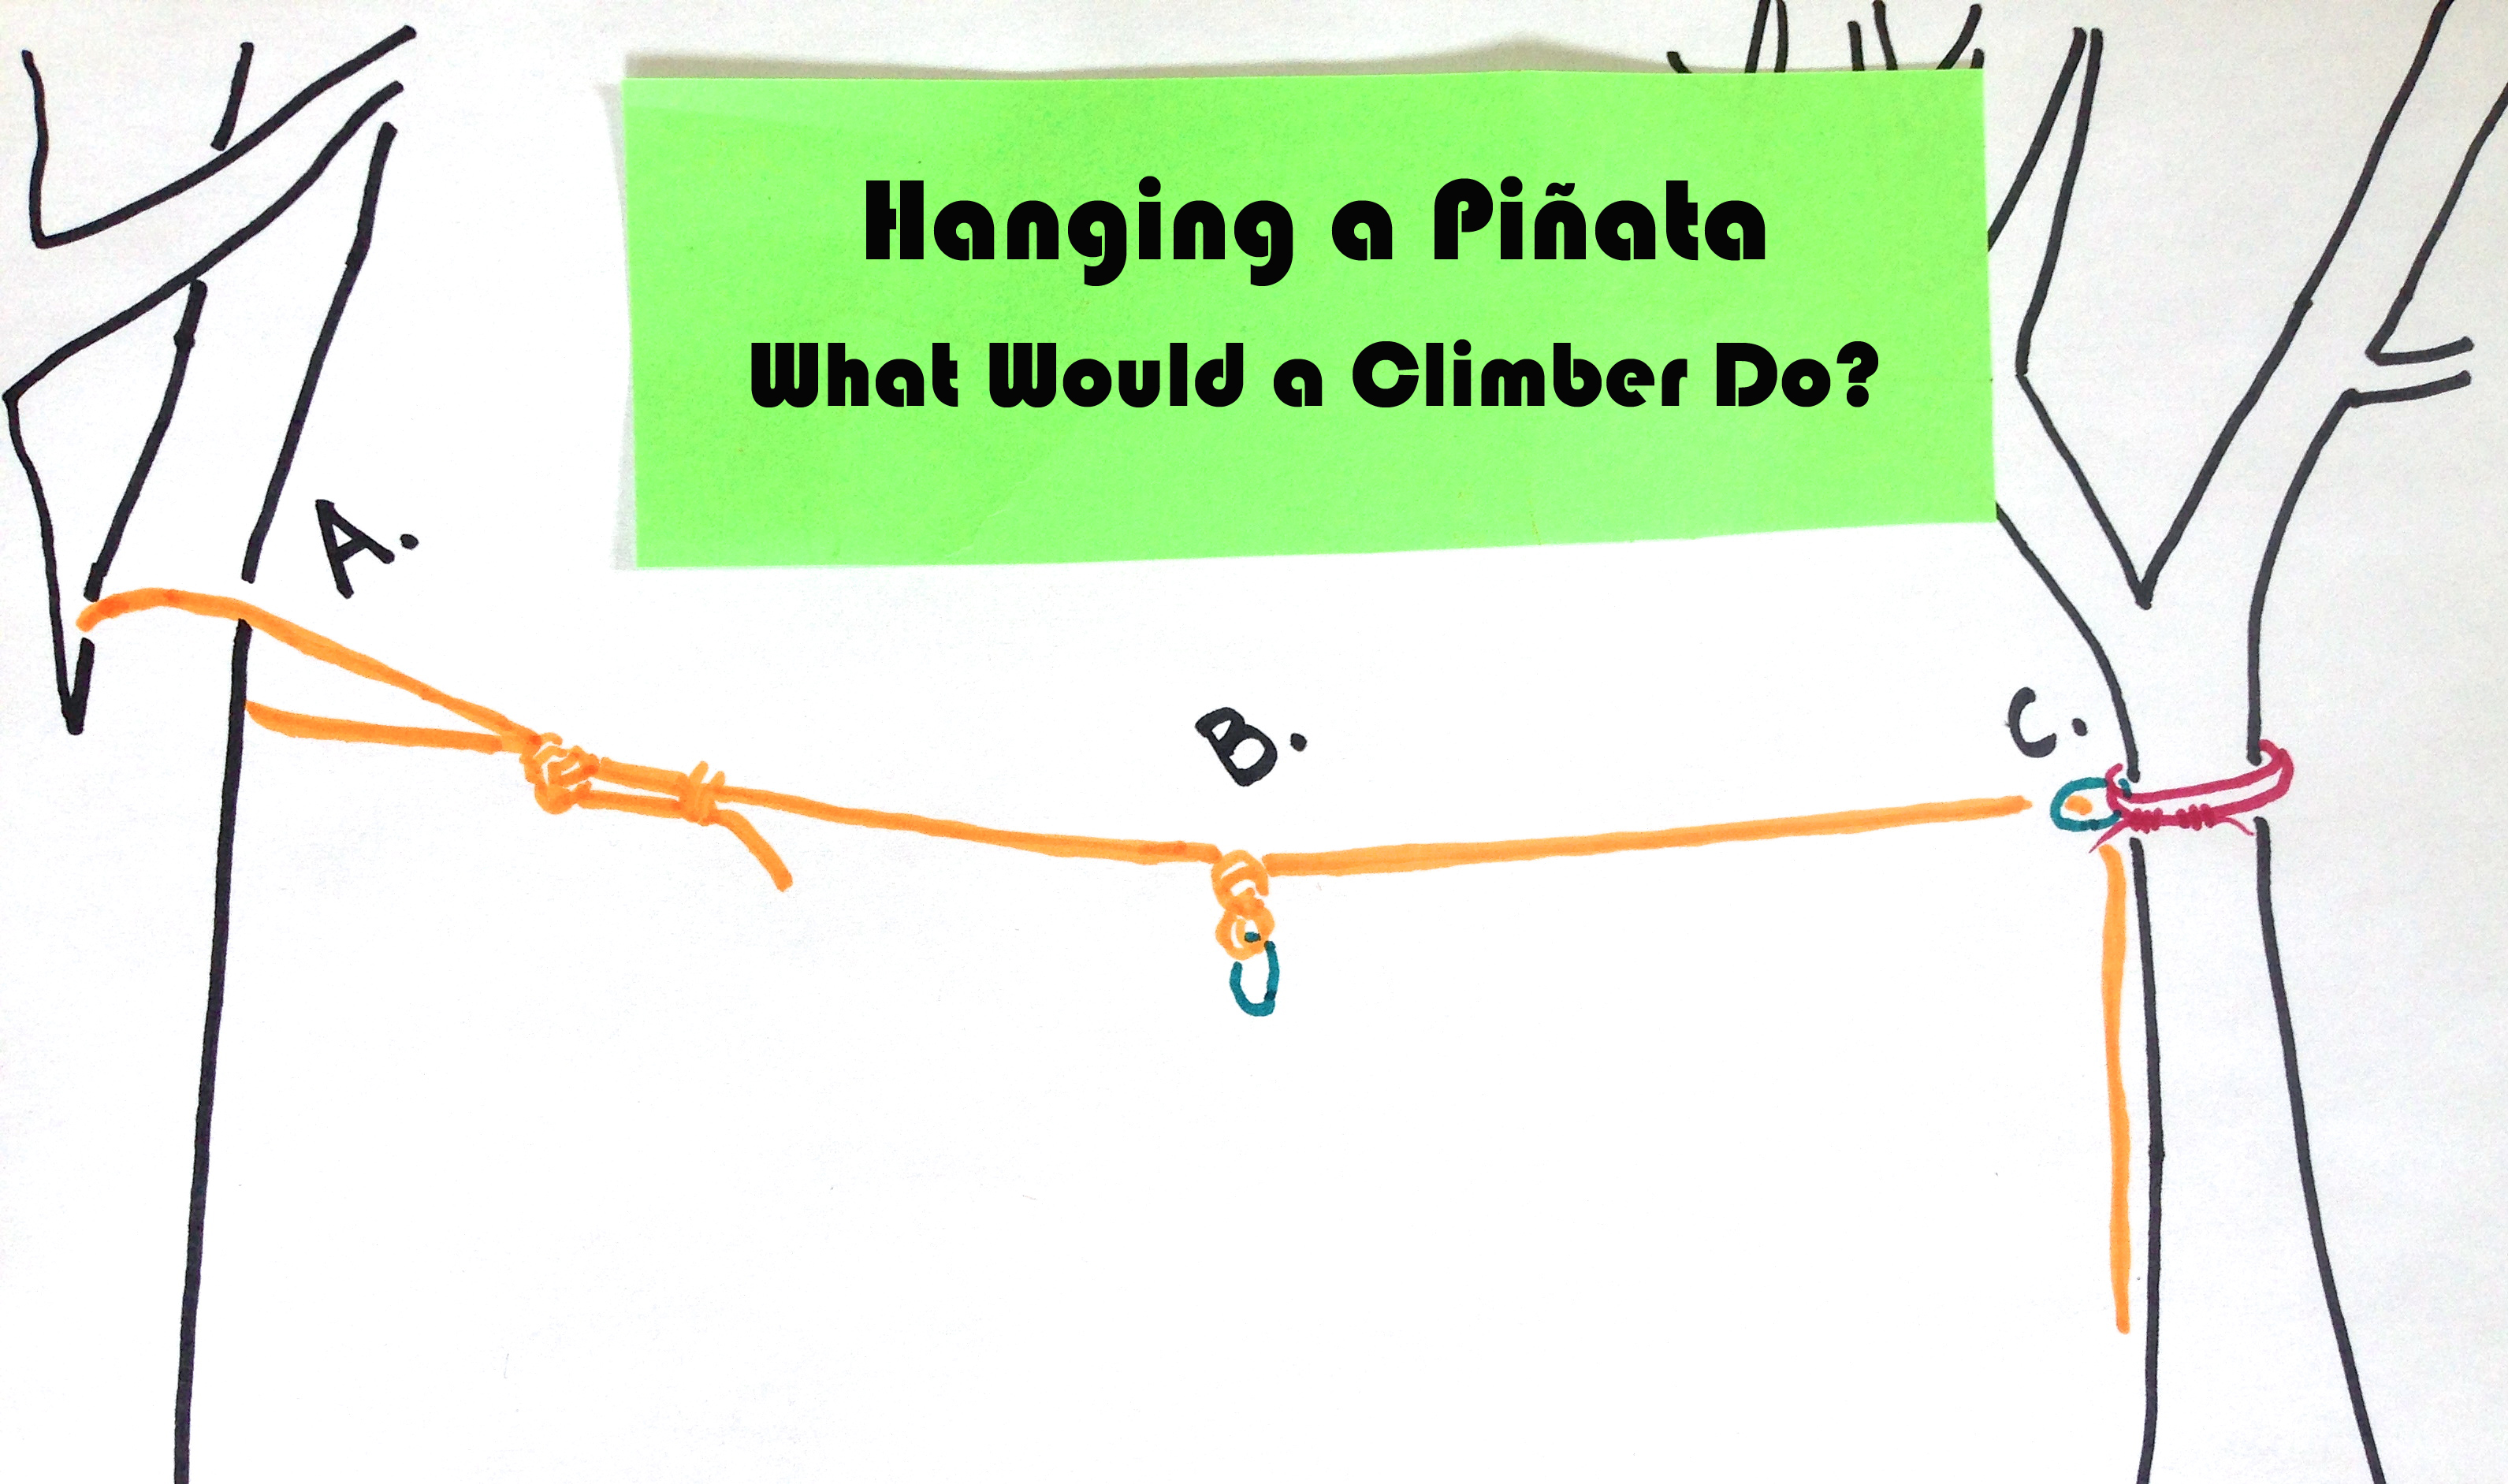 Hanging a Piñata: What Would a Climber Do?